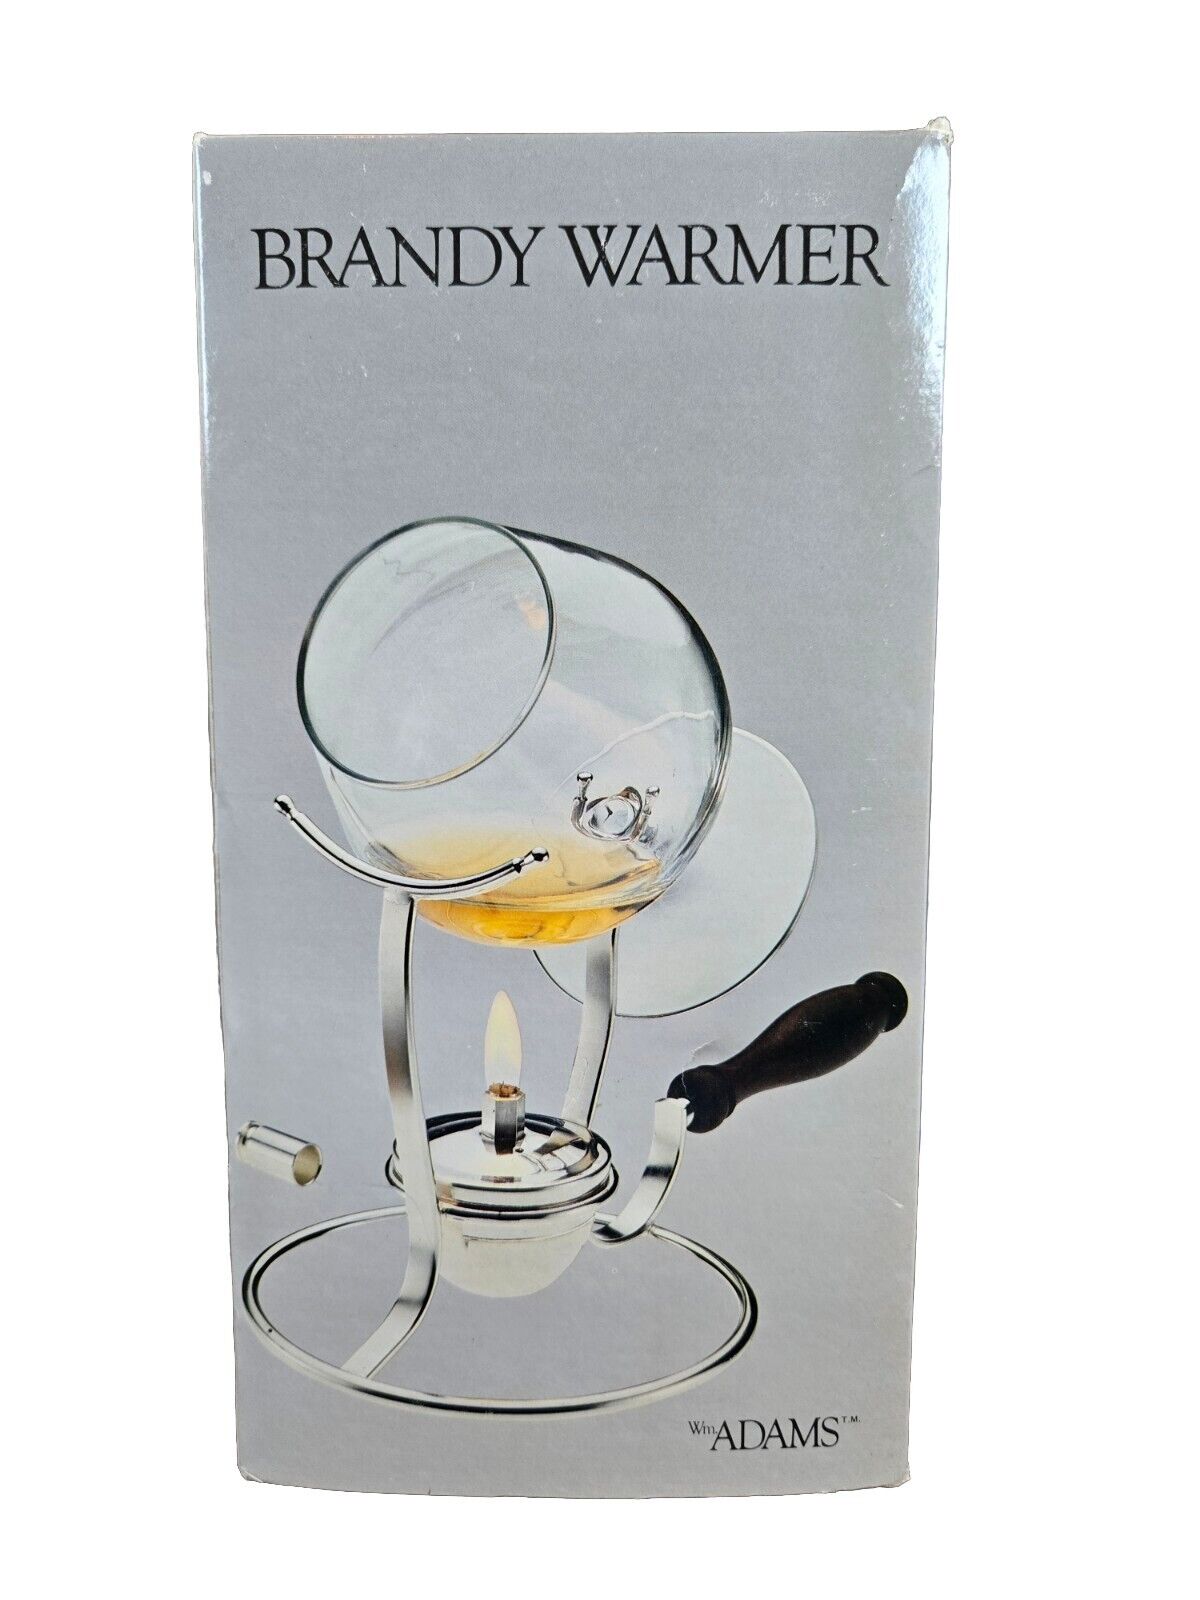 Vintage 80s Silverplate Brandy Warmer 10 oz Snifter William Adams NOS Never Used